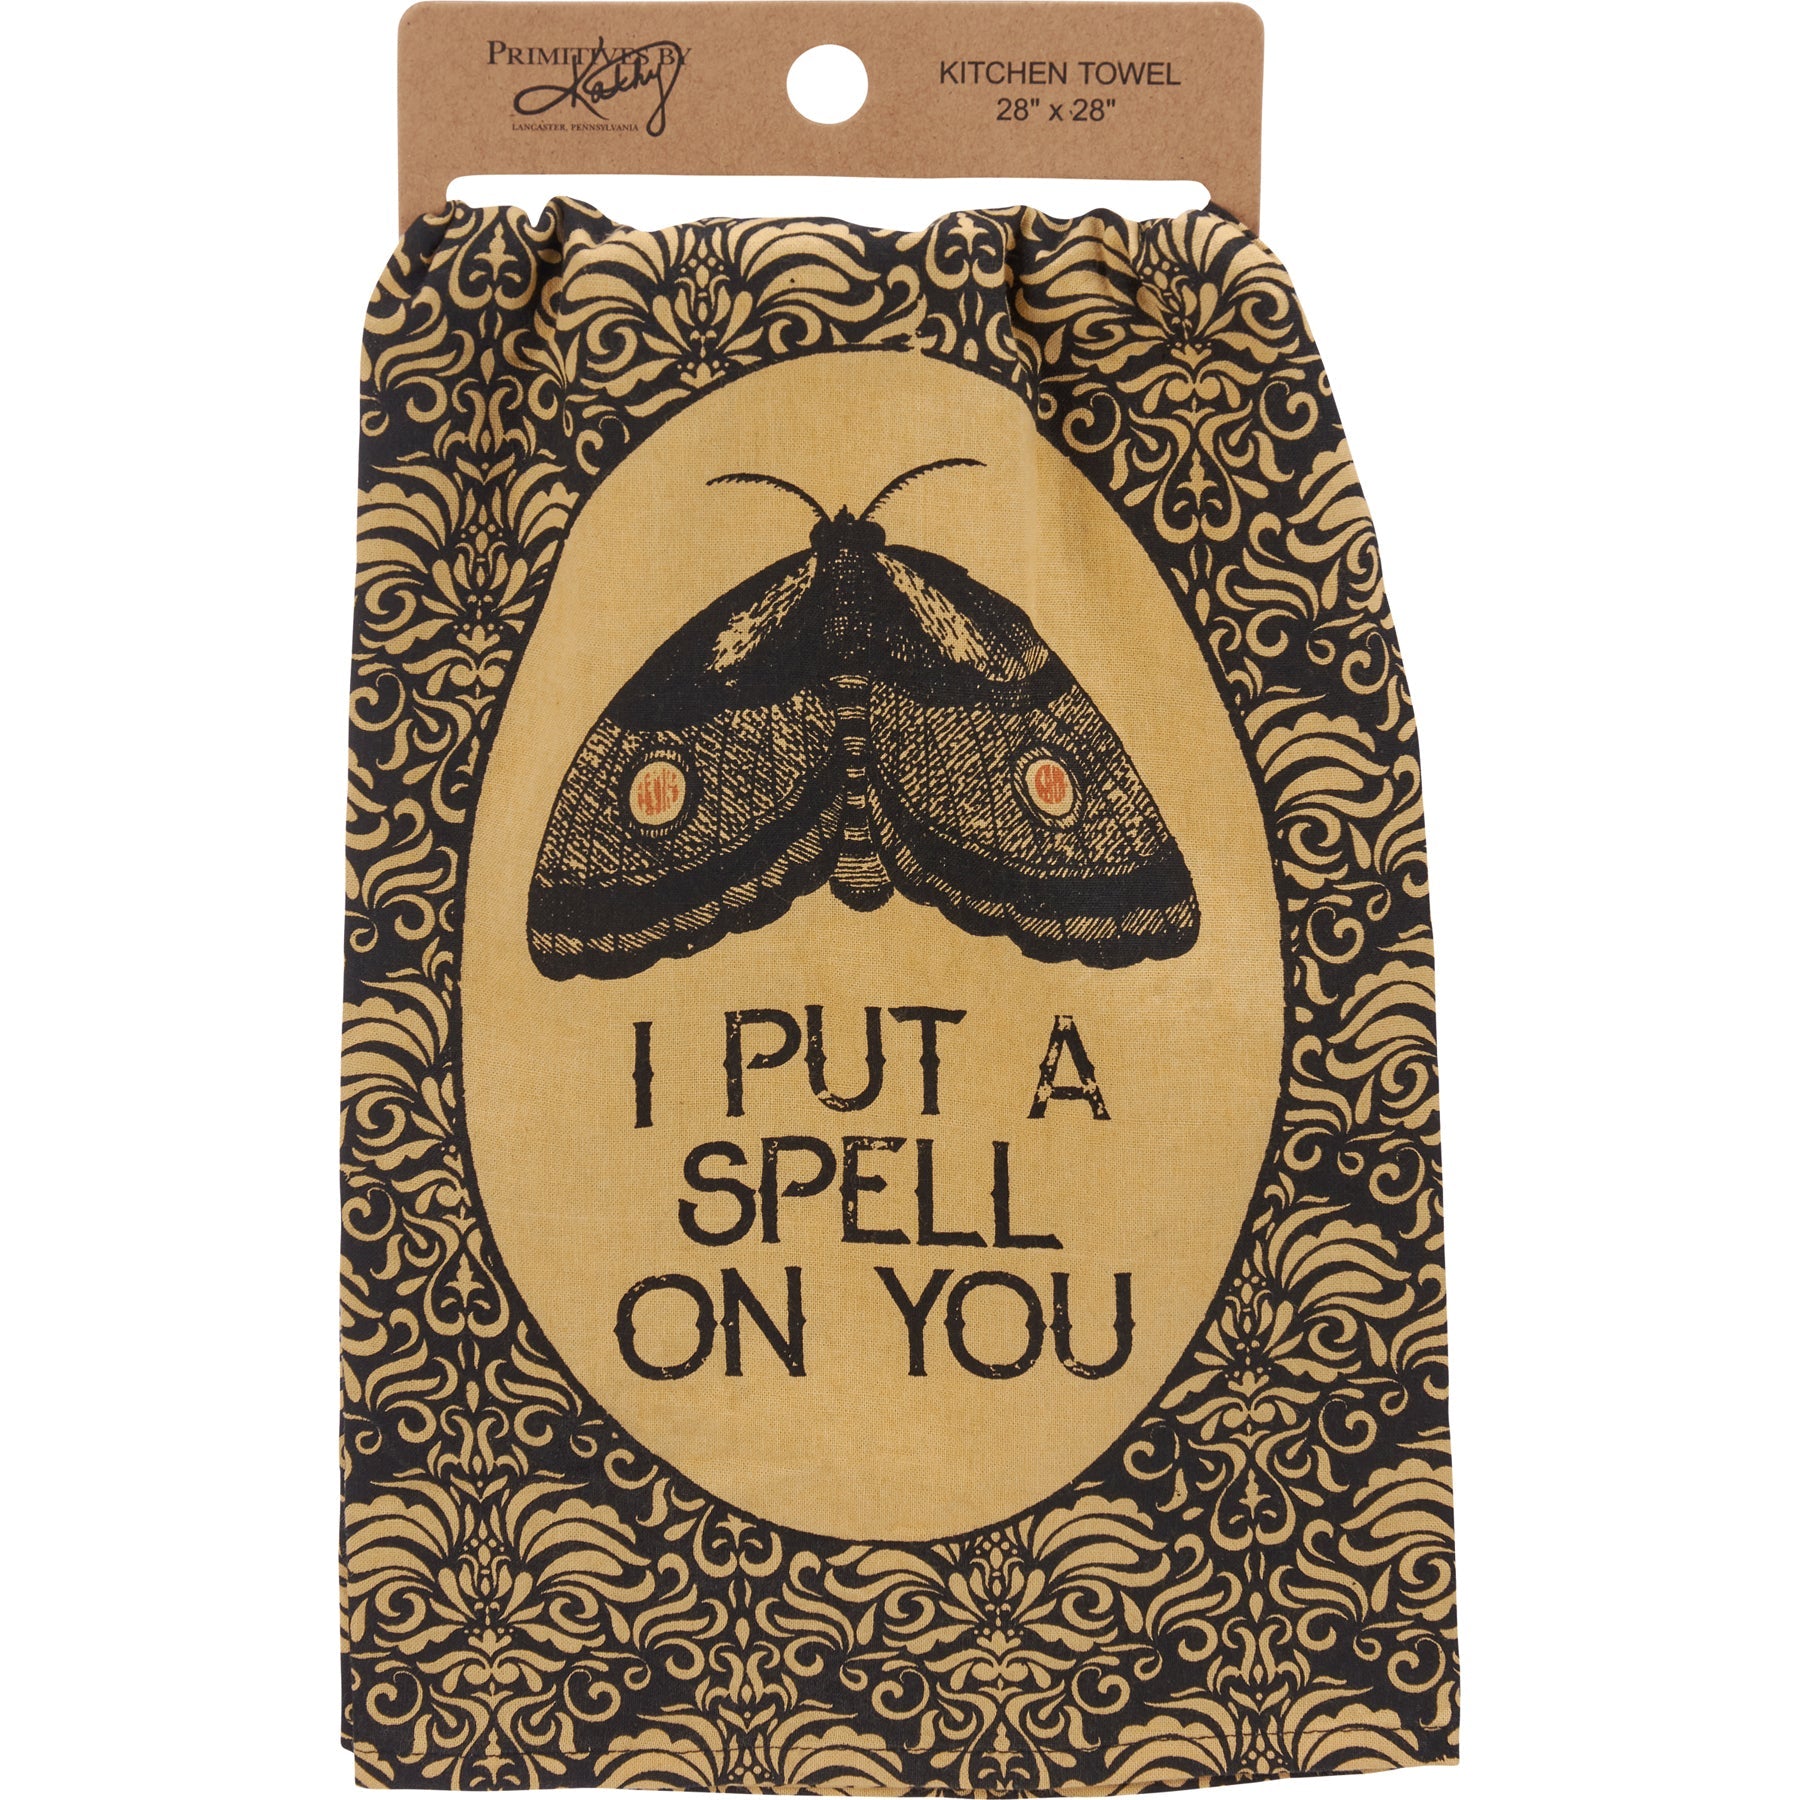 I Put A Spell On You Kitchen Towel | 28" x 28"